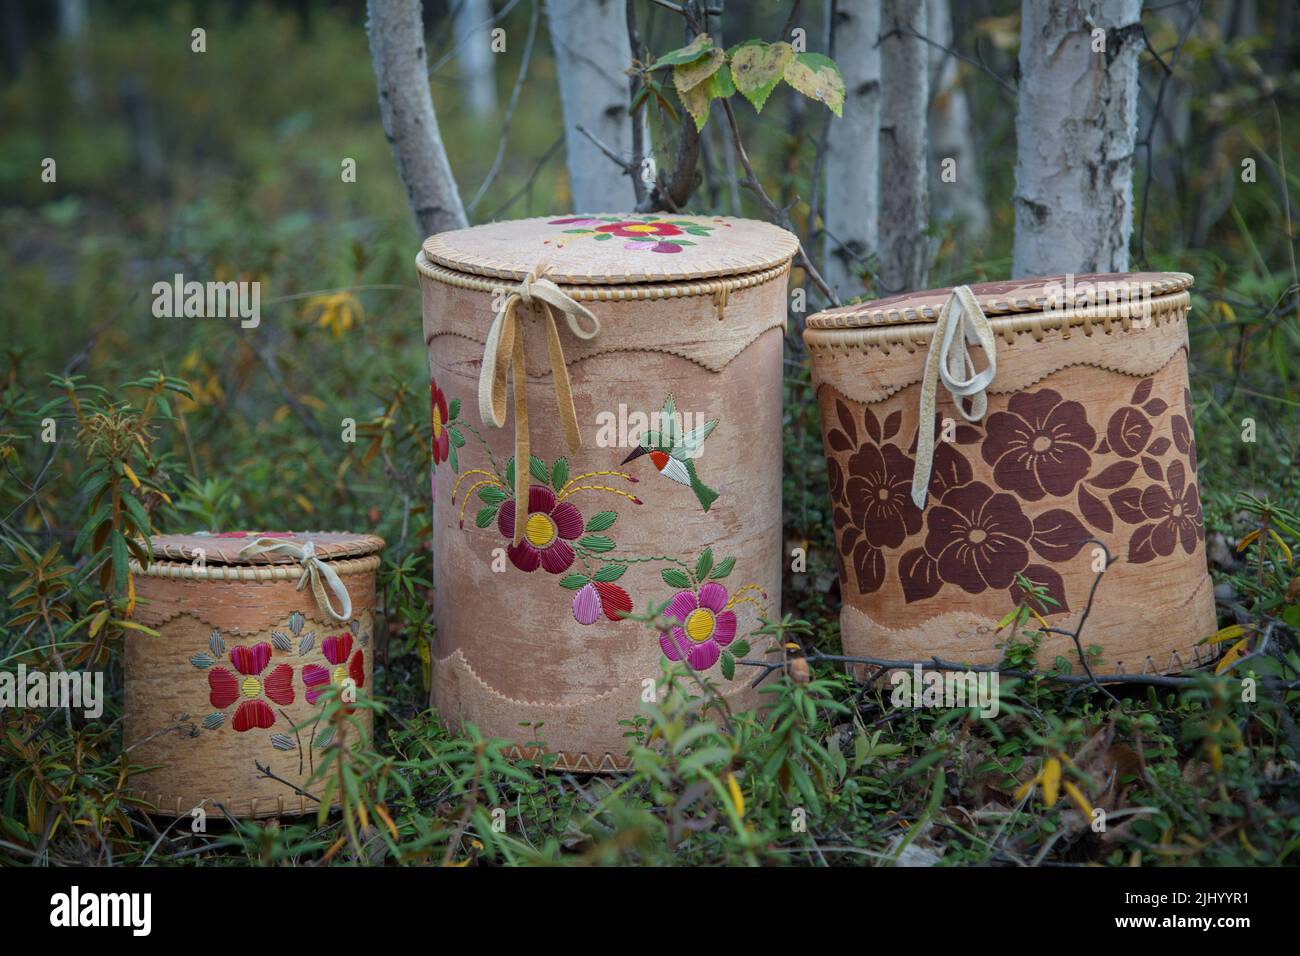 Traditional Indigenous Dene handmade Birch bark baskets with porcupine quillwork, made in Fort Liard, Northwest Territories, Canada. Stock Photo